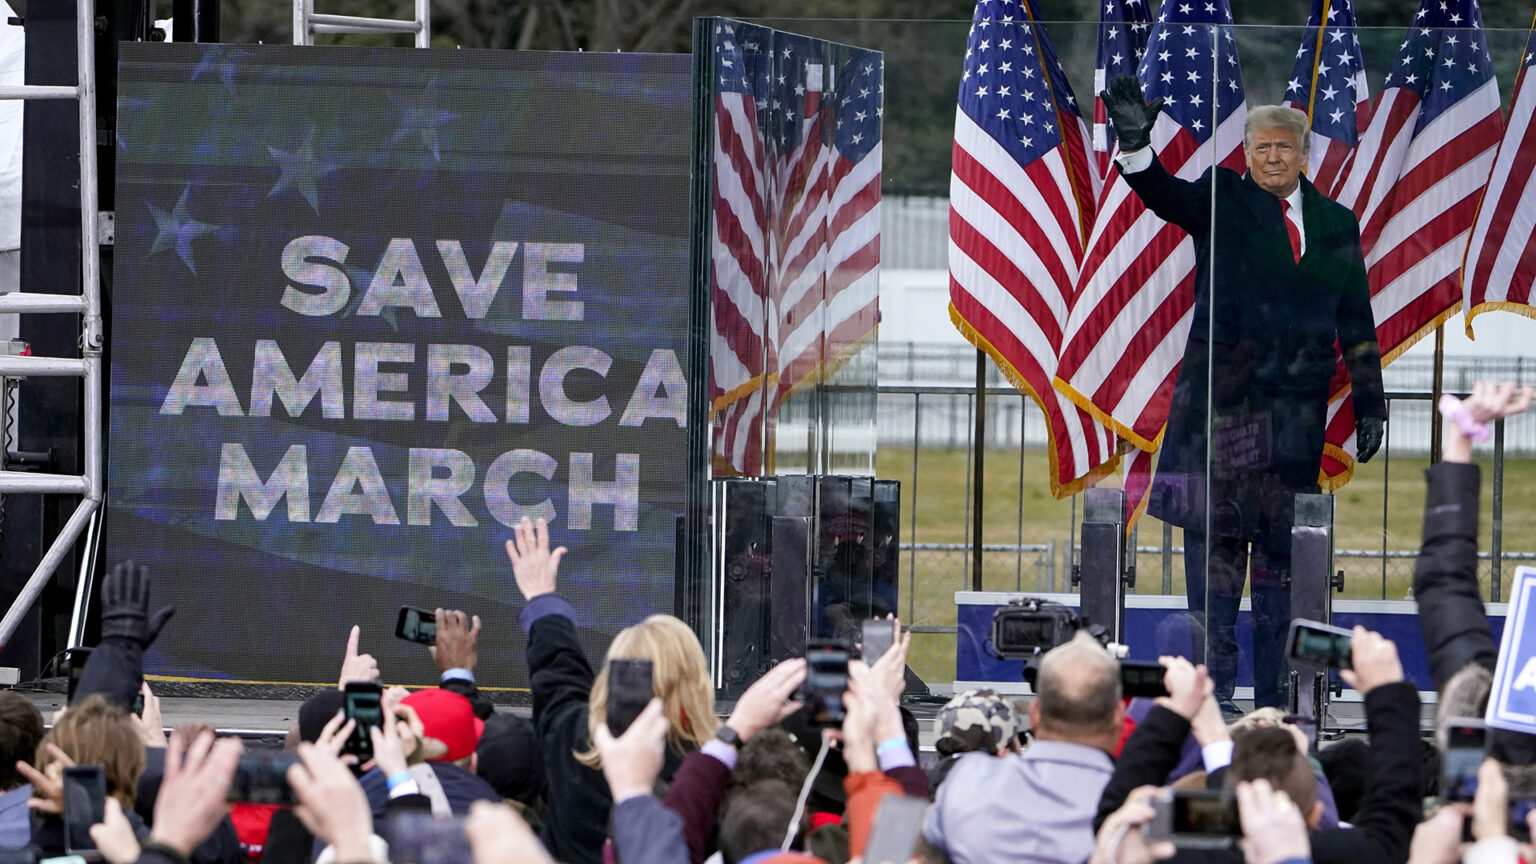 Donald Trump holds his right hand up in the air while standing on a stage and behind transparent barriers, next to an electronic screen showing the words Save America March and in front of a row of U.S. flags, with people facing the stage and holding their hands, cameras and cell phones in the air.